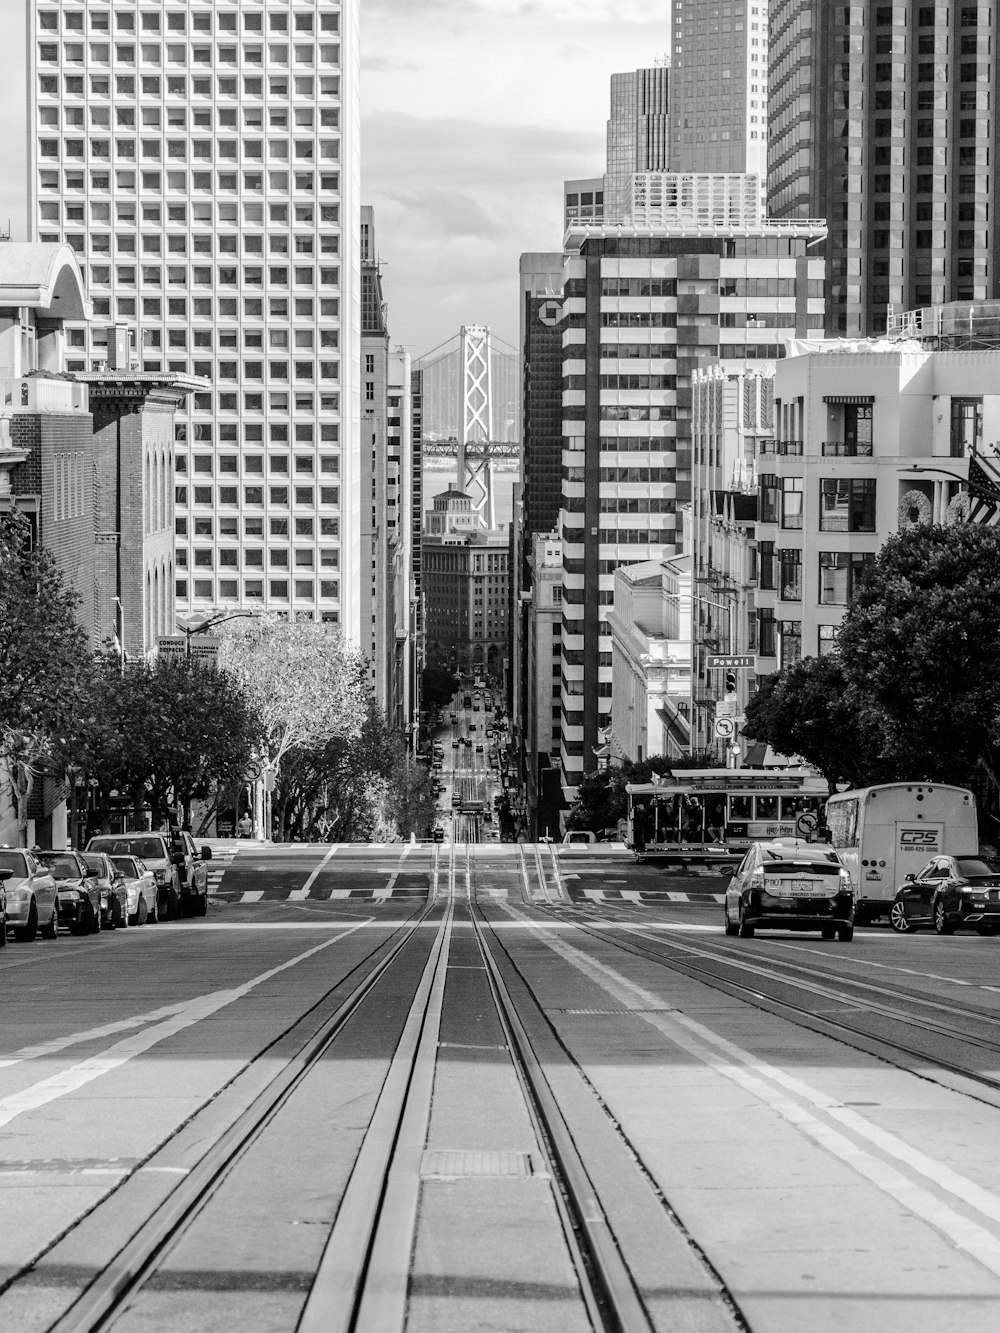 grayscale photo of city buildings and cars on road